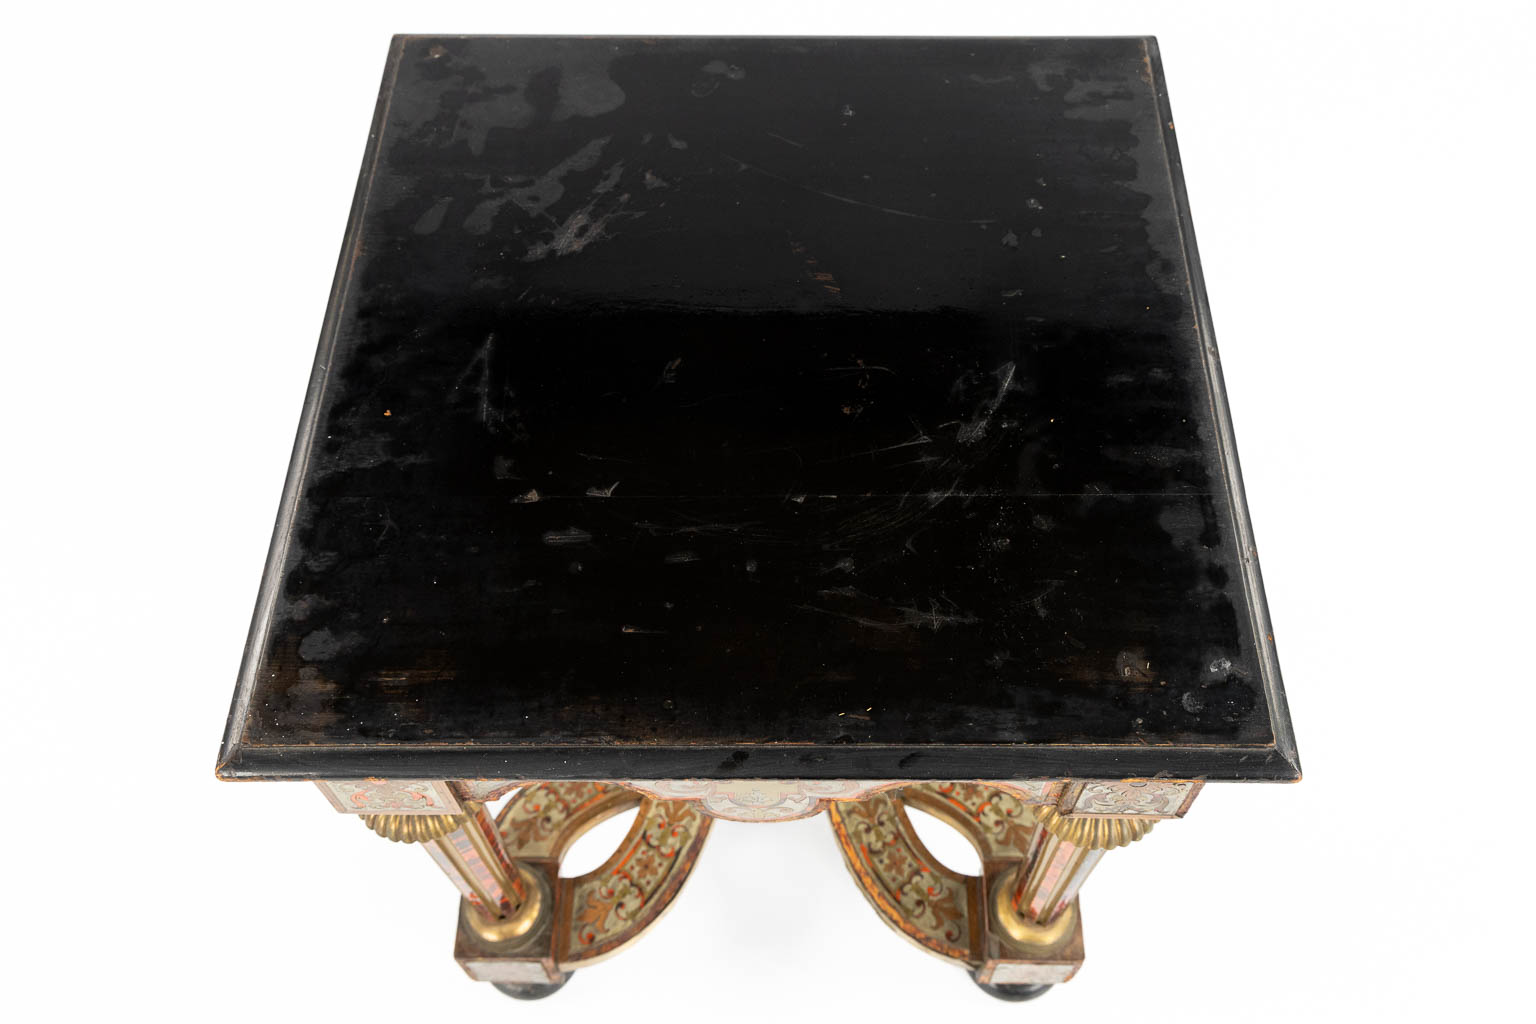 A Napoleon 3 style, Boulle and copper inlay side table, 20th C. (L:47 x W:47 x H:53 cm) - Image 12 of 12